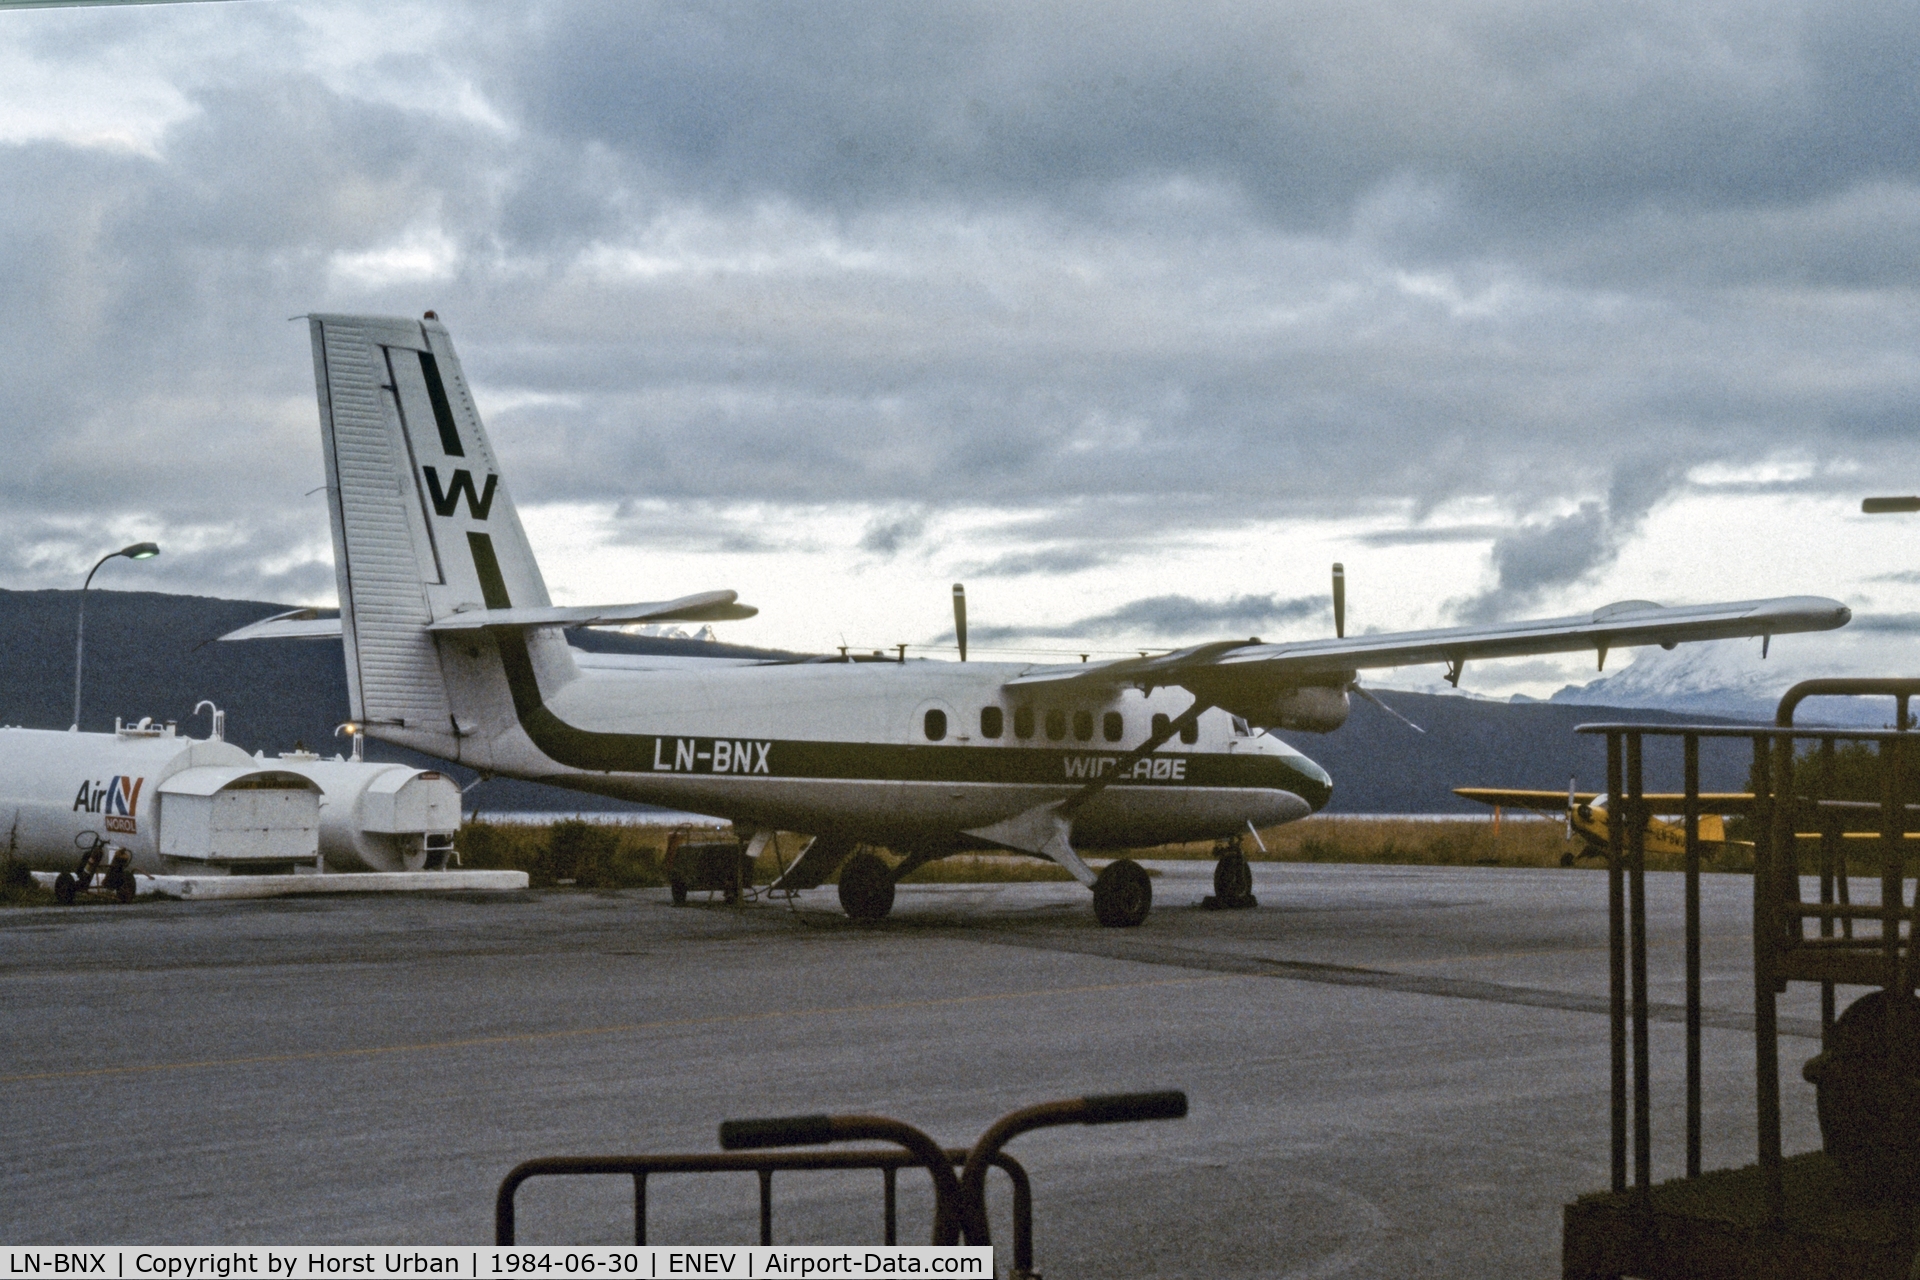 LN-BNX, 1973 De Havilland Canada DHC-6-300 Twin Otter C/N 353, Some time in 1984 or 1985 in Norway, most likely Harstad/Narvik